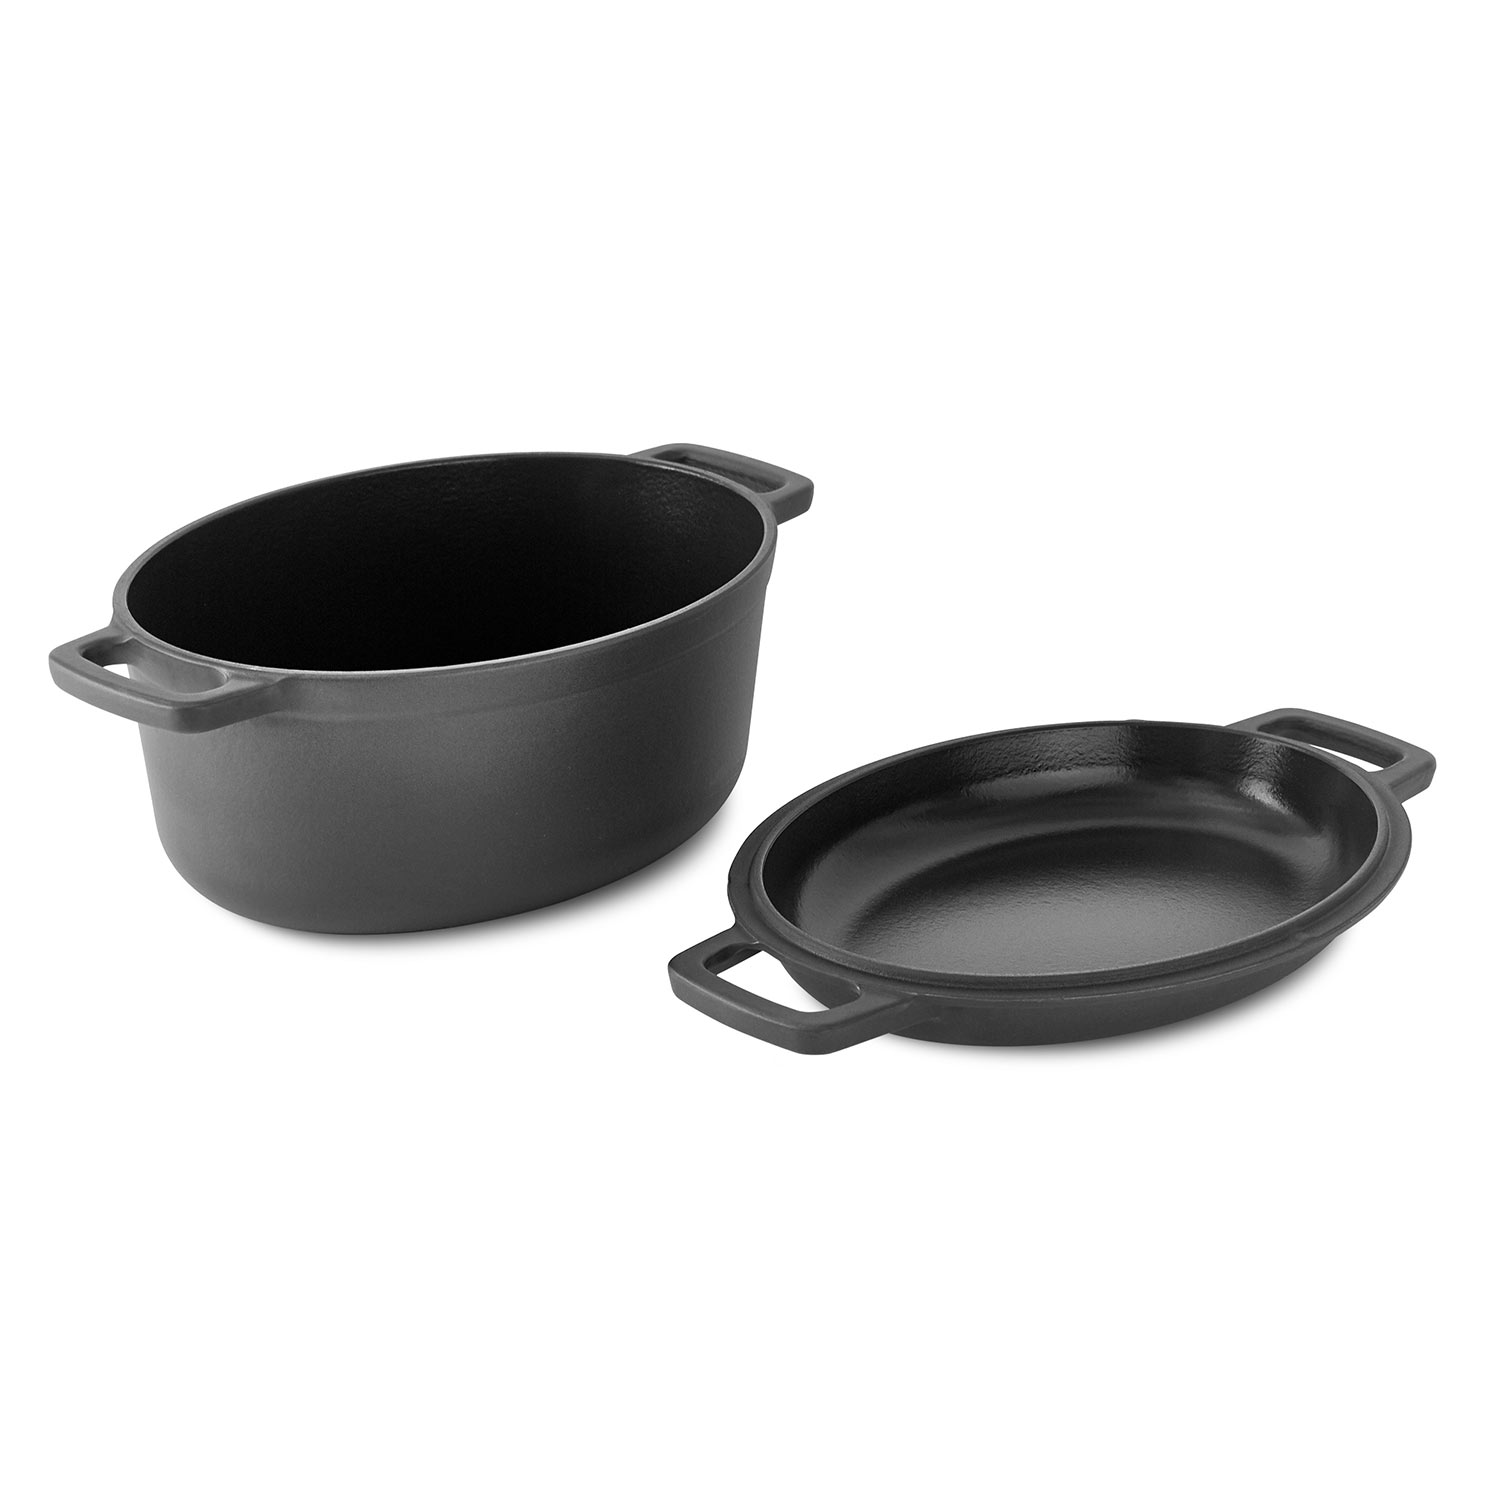 Overmont Dutch Oven 5 QT Cast Iron Casserole Pot Skillet Lid Pre Seasoned with Handle Covers & Stand for Camping Home Cooking BBQ Baking 